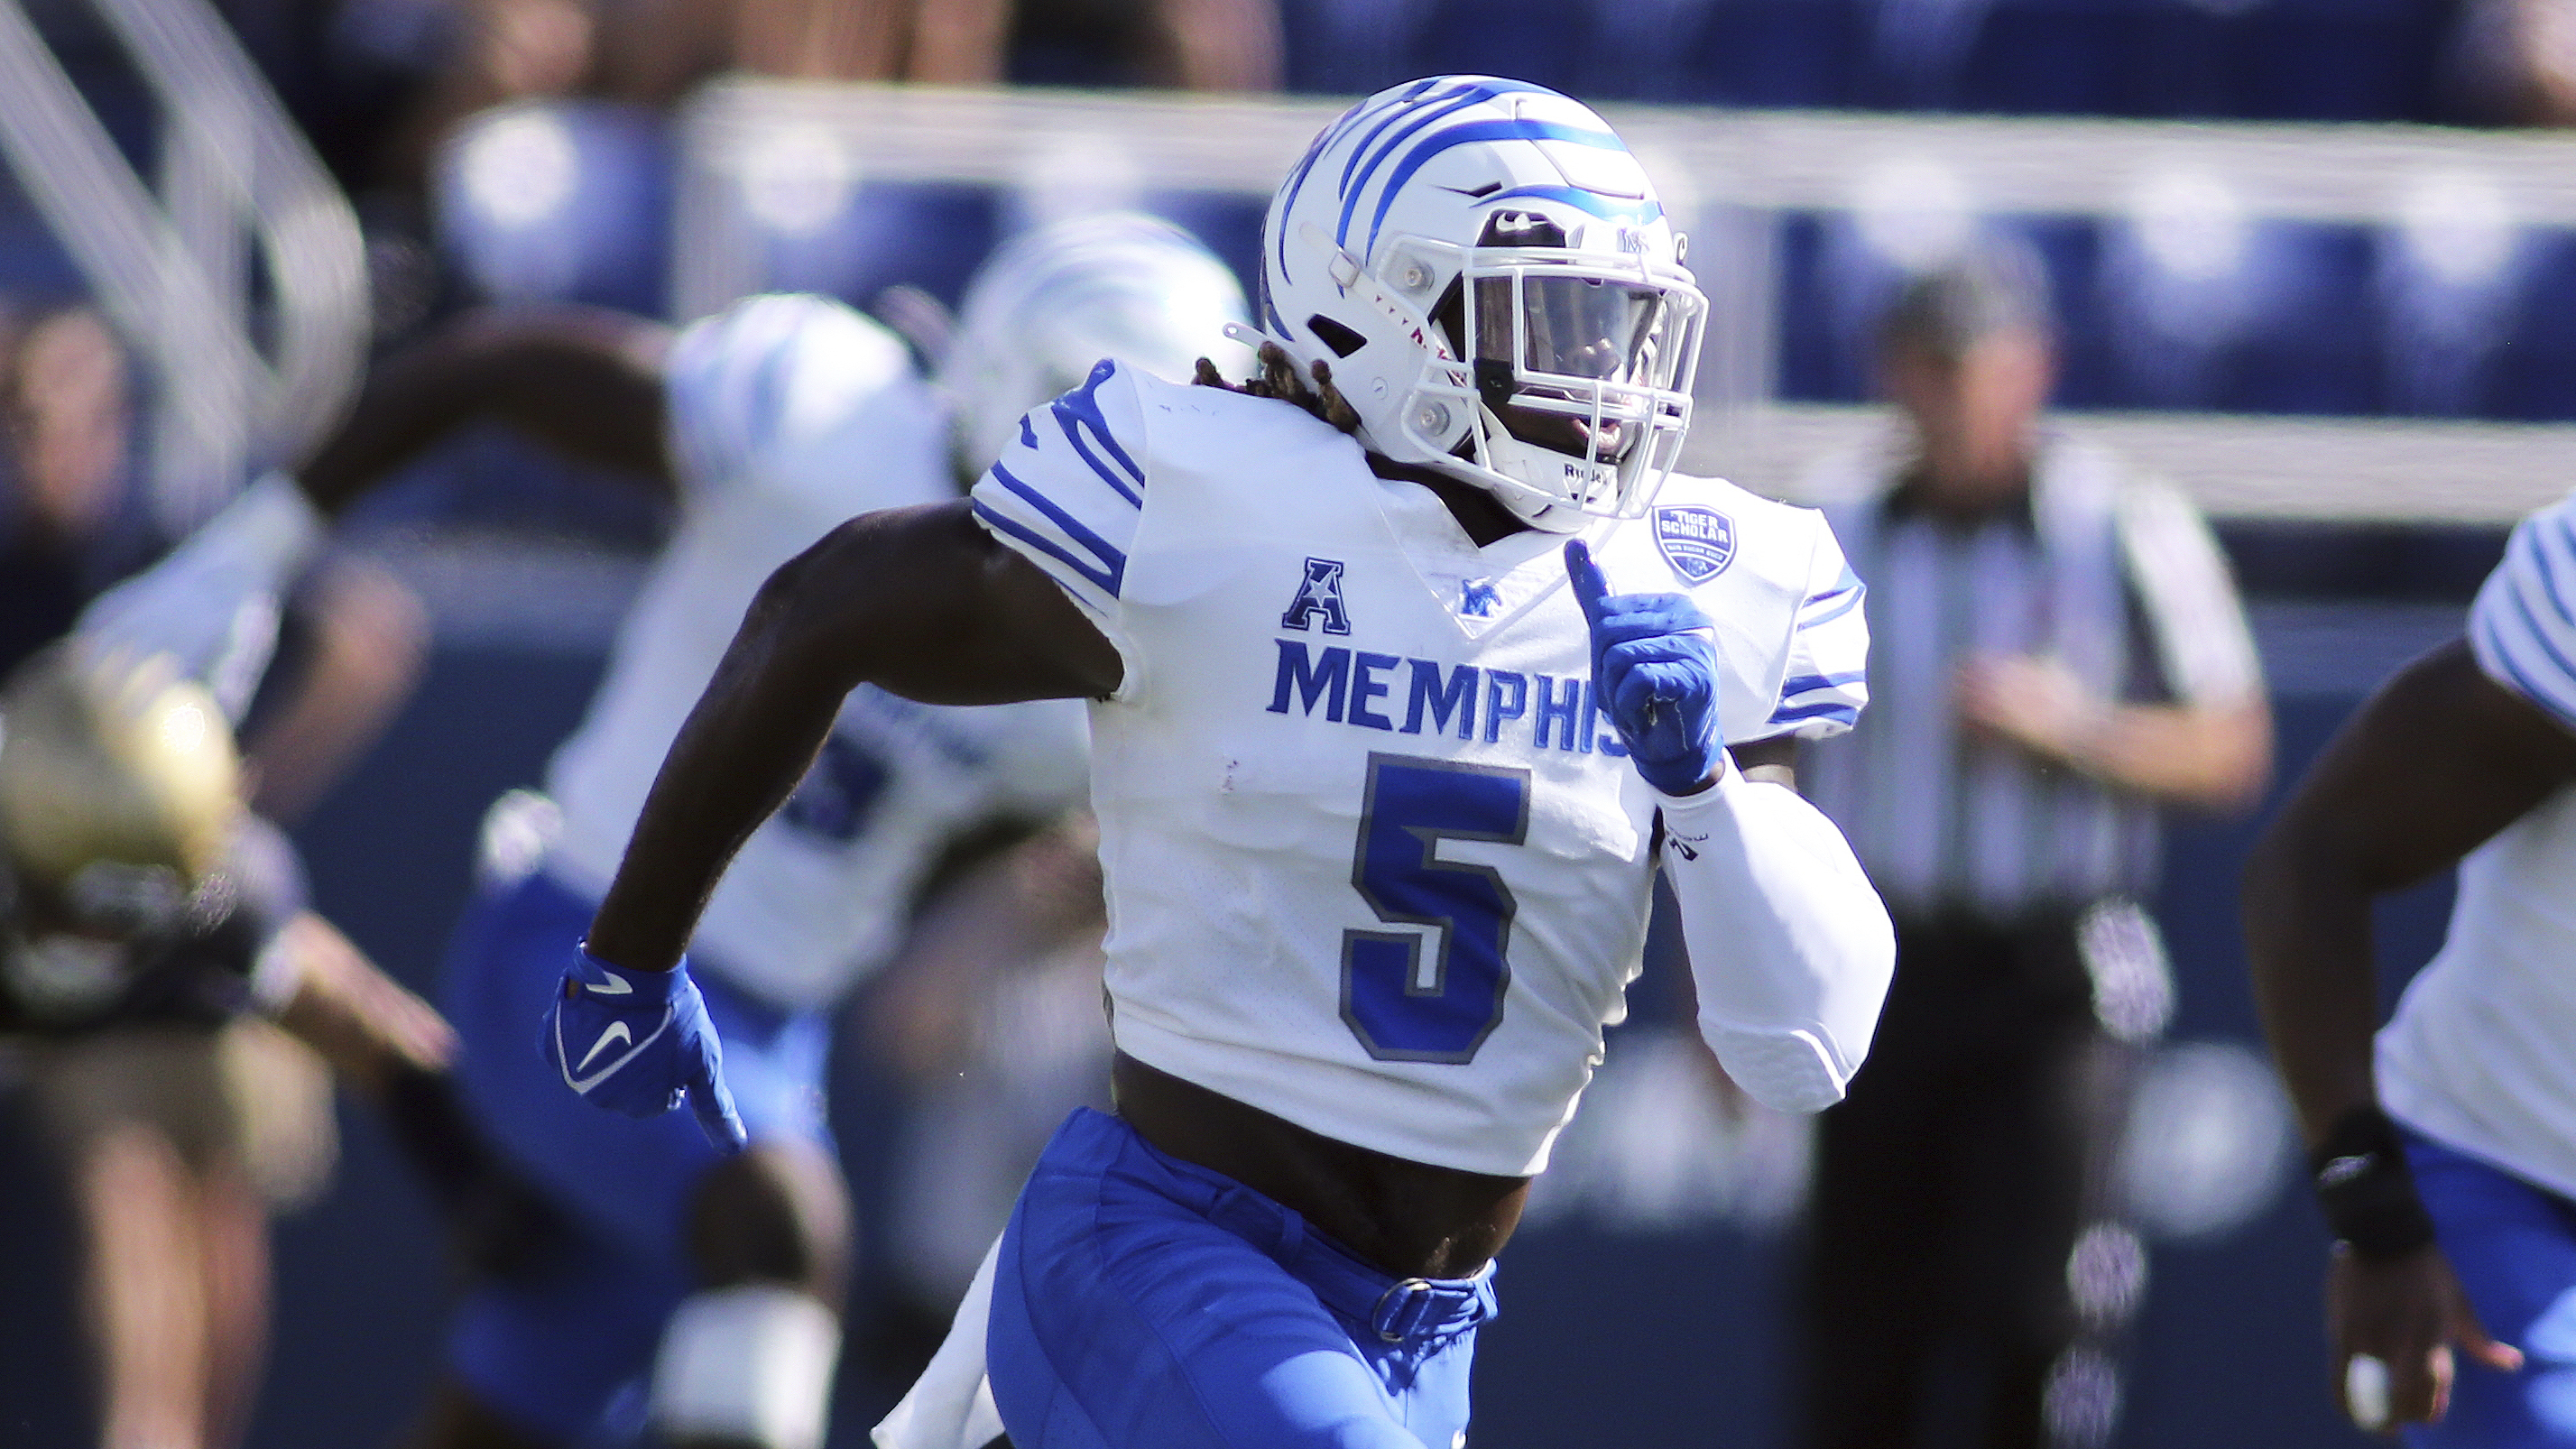 How to Watch Memphis Tigers vs. Clemson Tigers: Live Stream or on